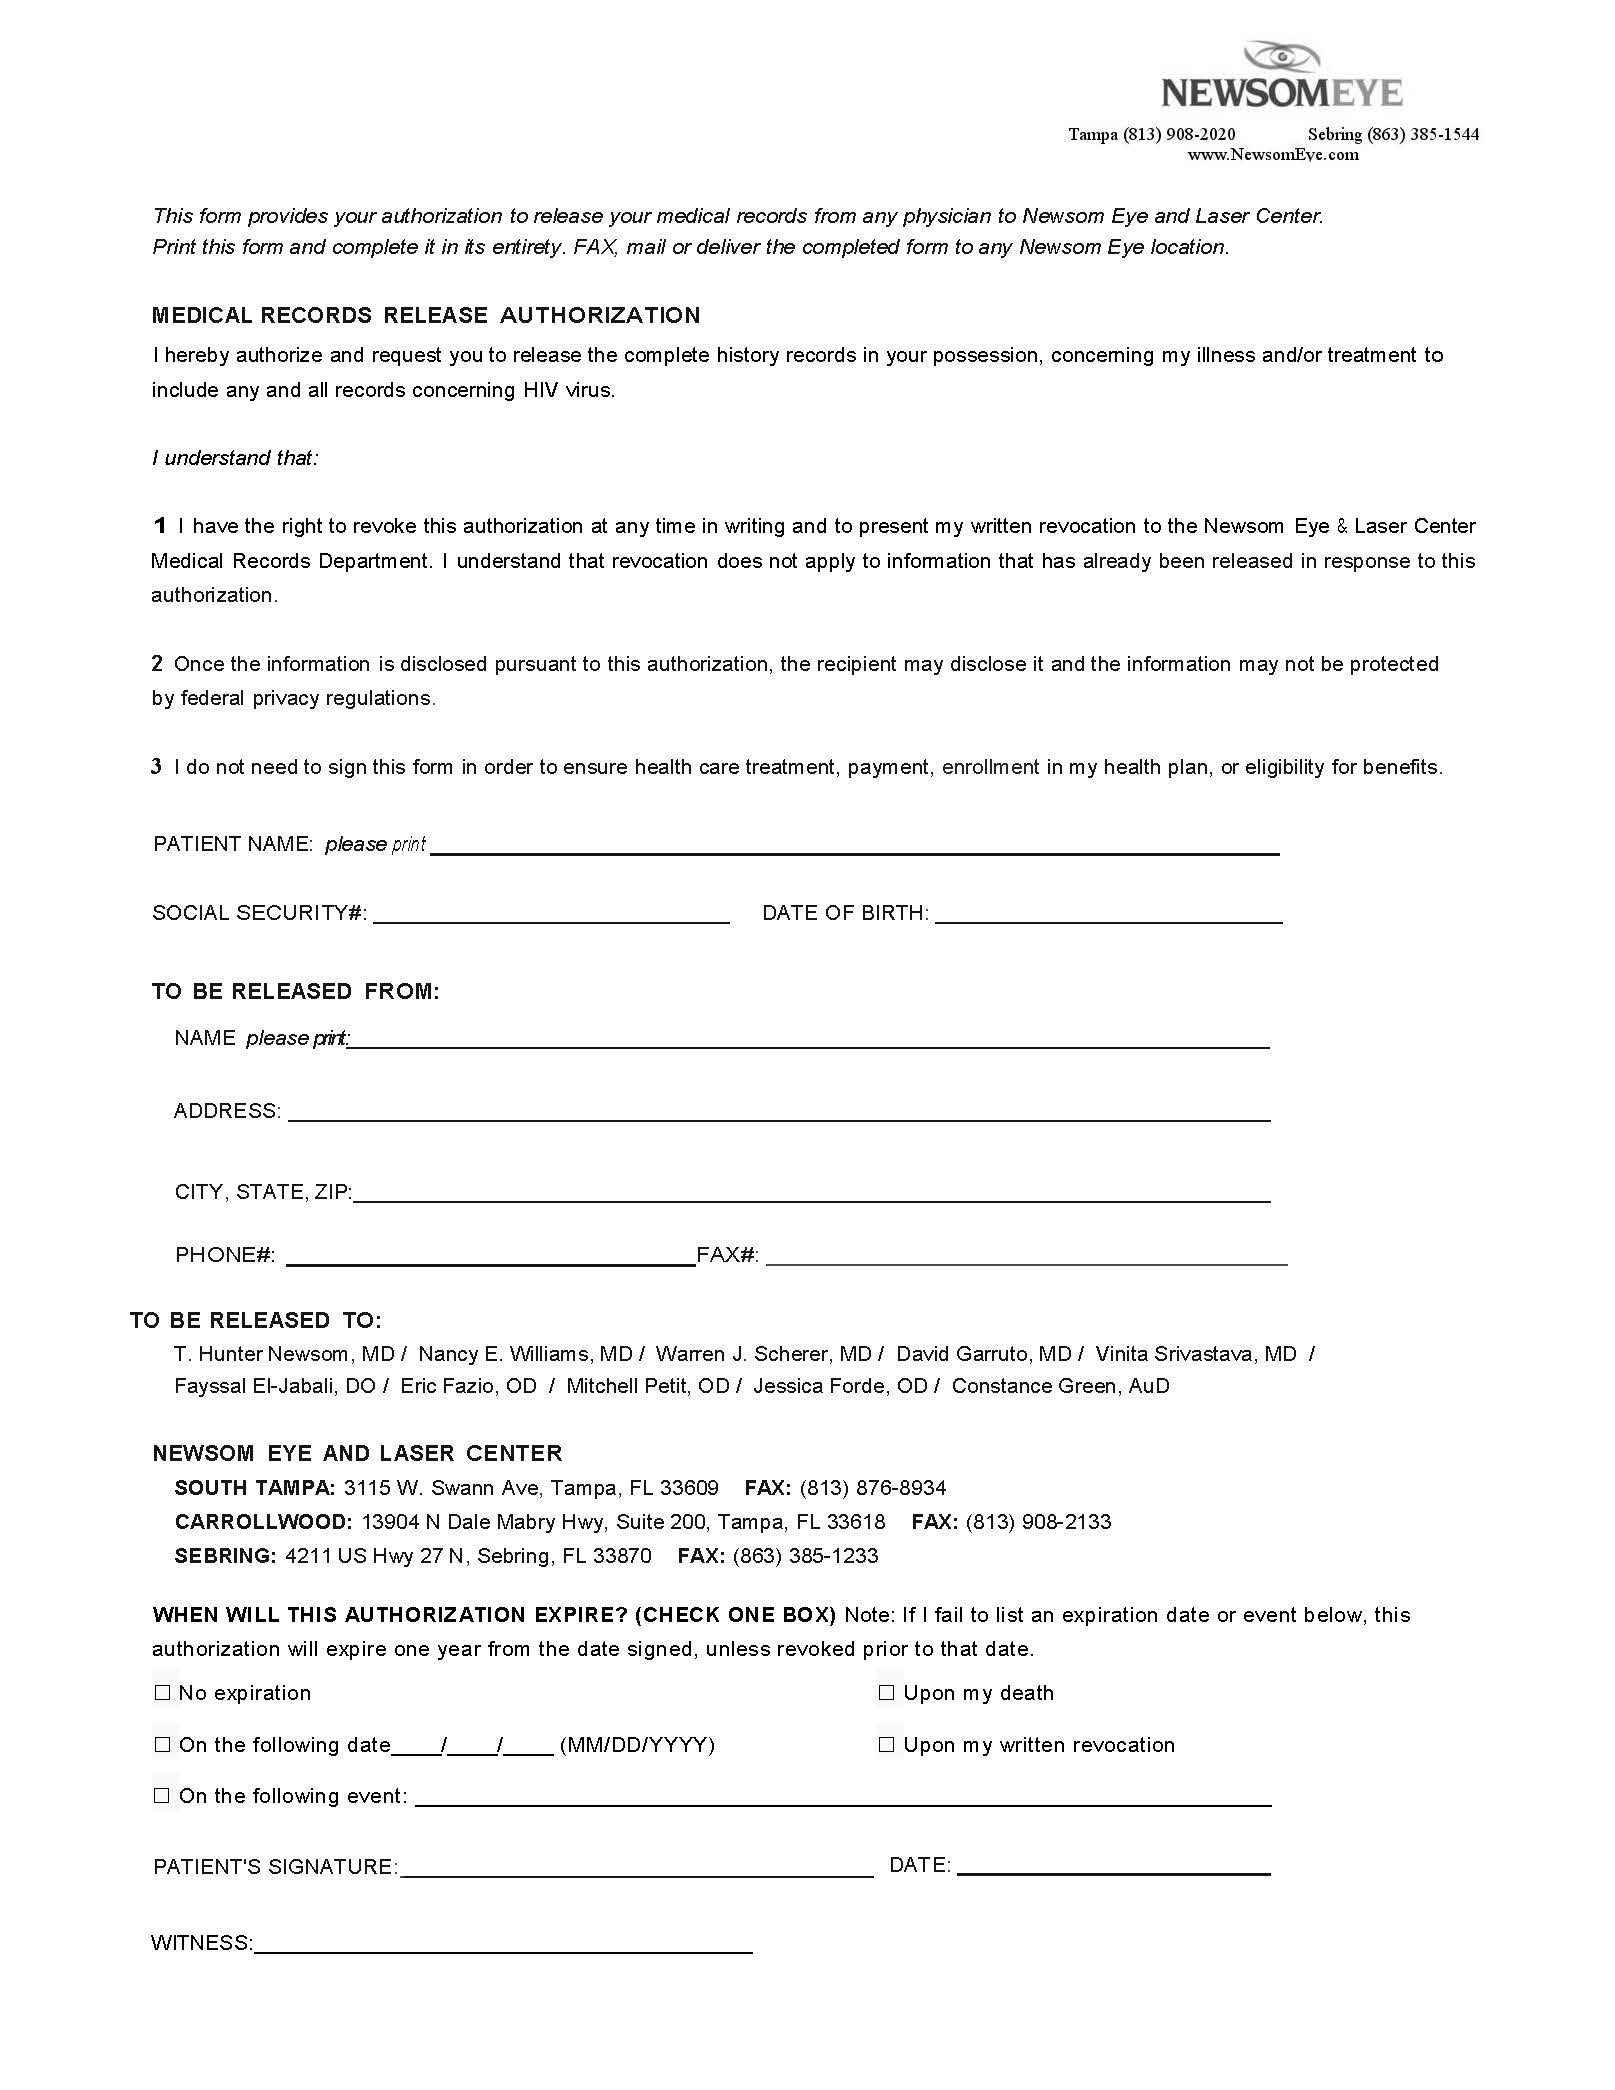 Medical Records Release Letter Template - Patient Medical Release forms Tampa Florida Newsom Eye